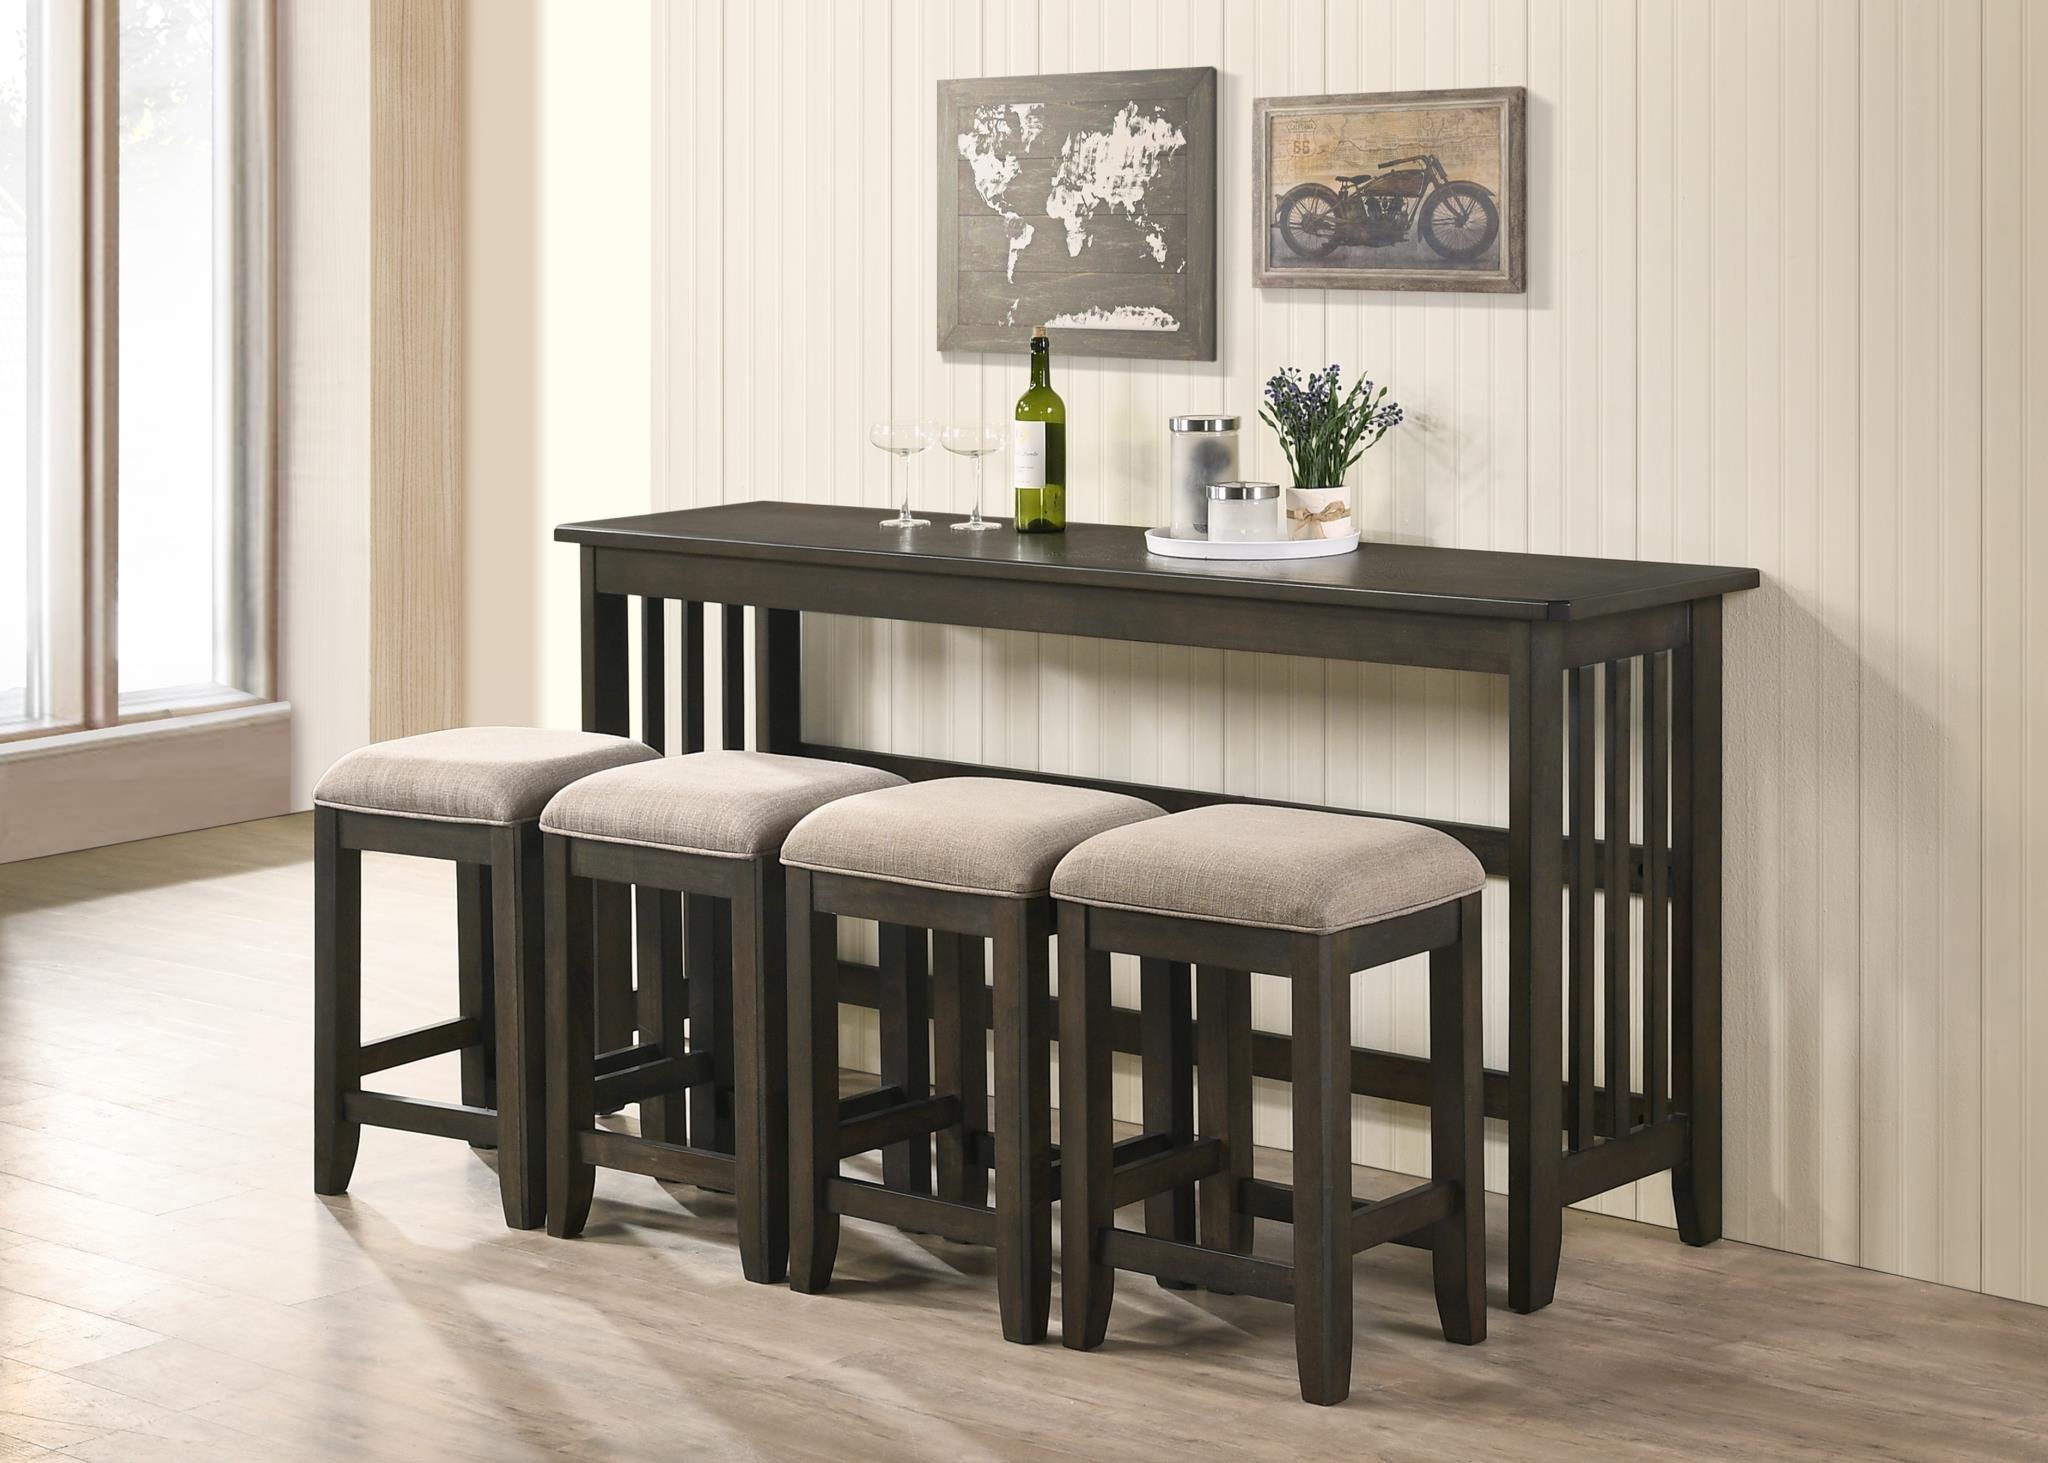 Transitional, Farmhouse Counter Table Set LINDSEY 5944DS-533 5944DS-533 in Brown, Beige 